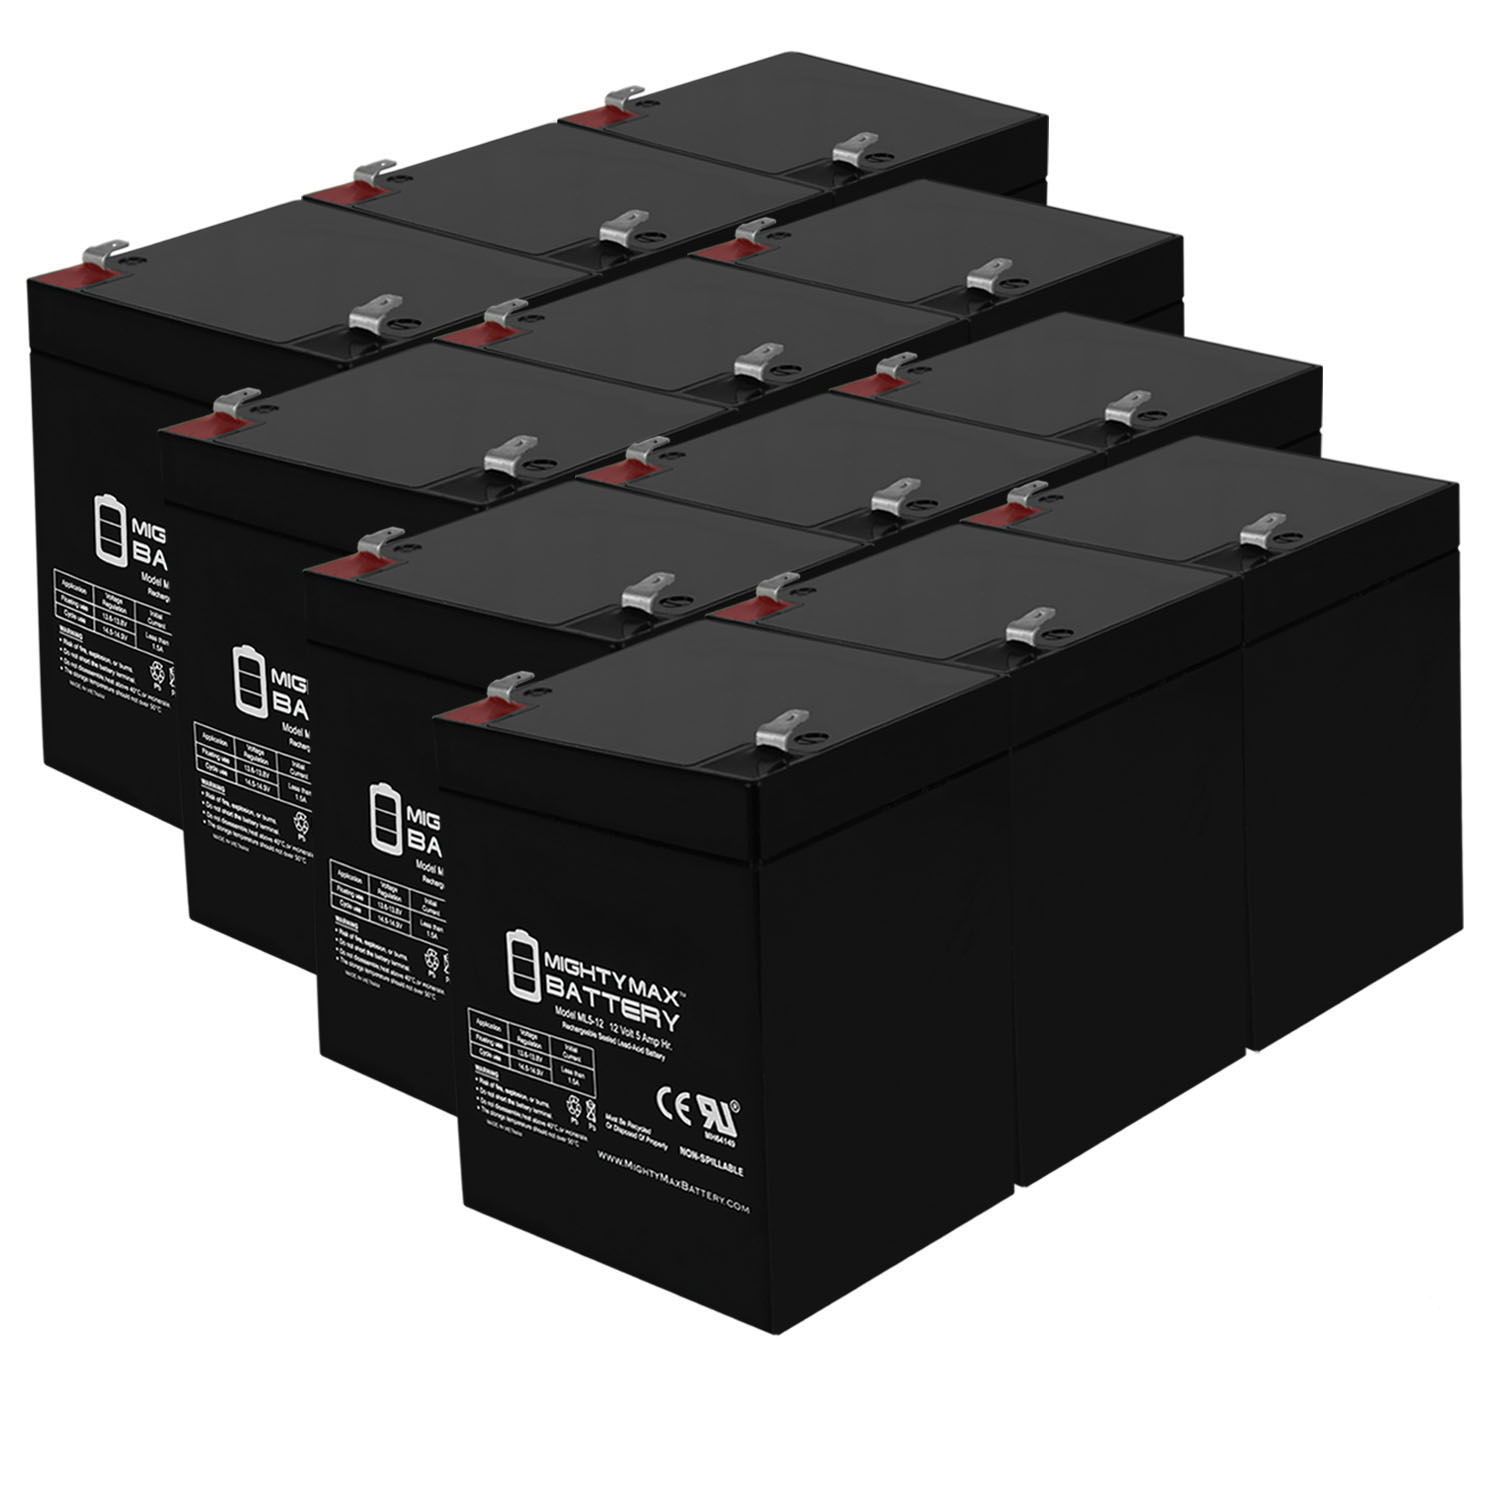 12V 5AH SLA Replacement Battery for SBS S1242 - 12 Pack